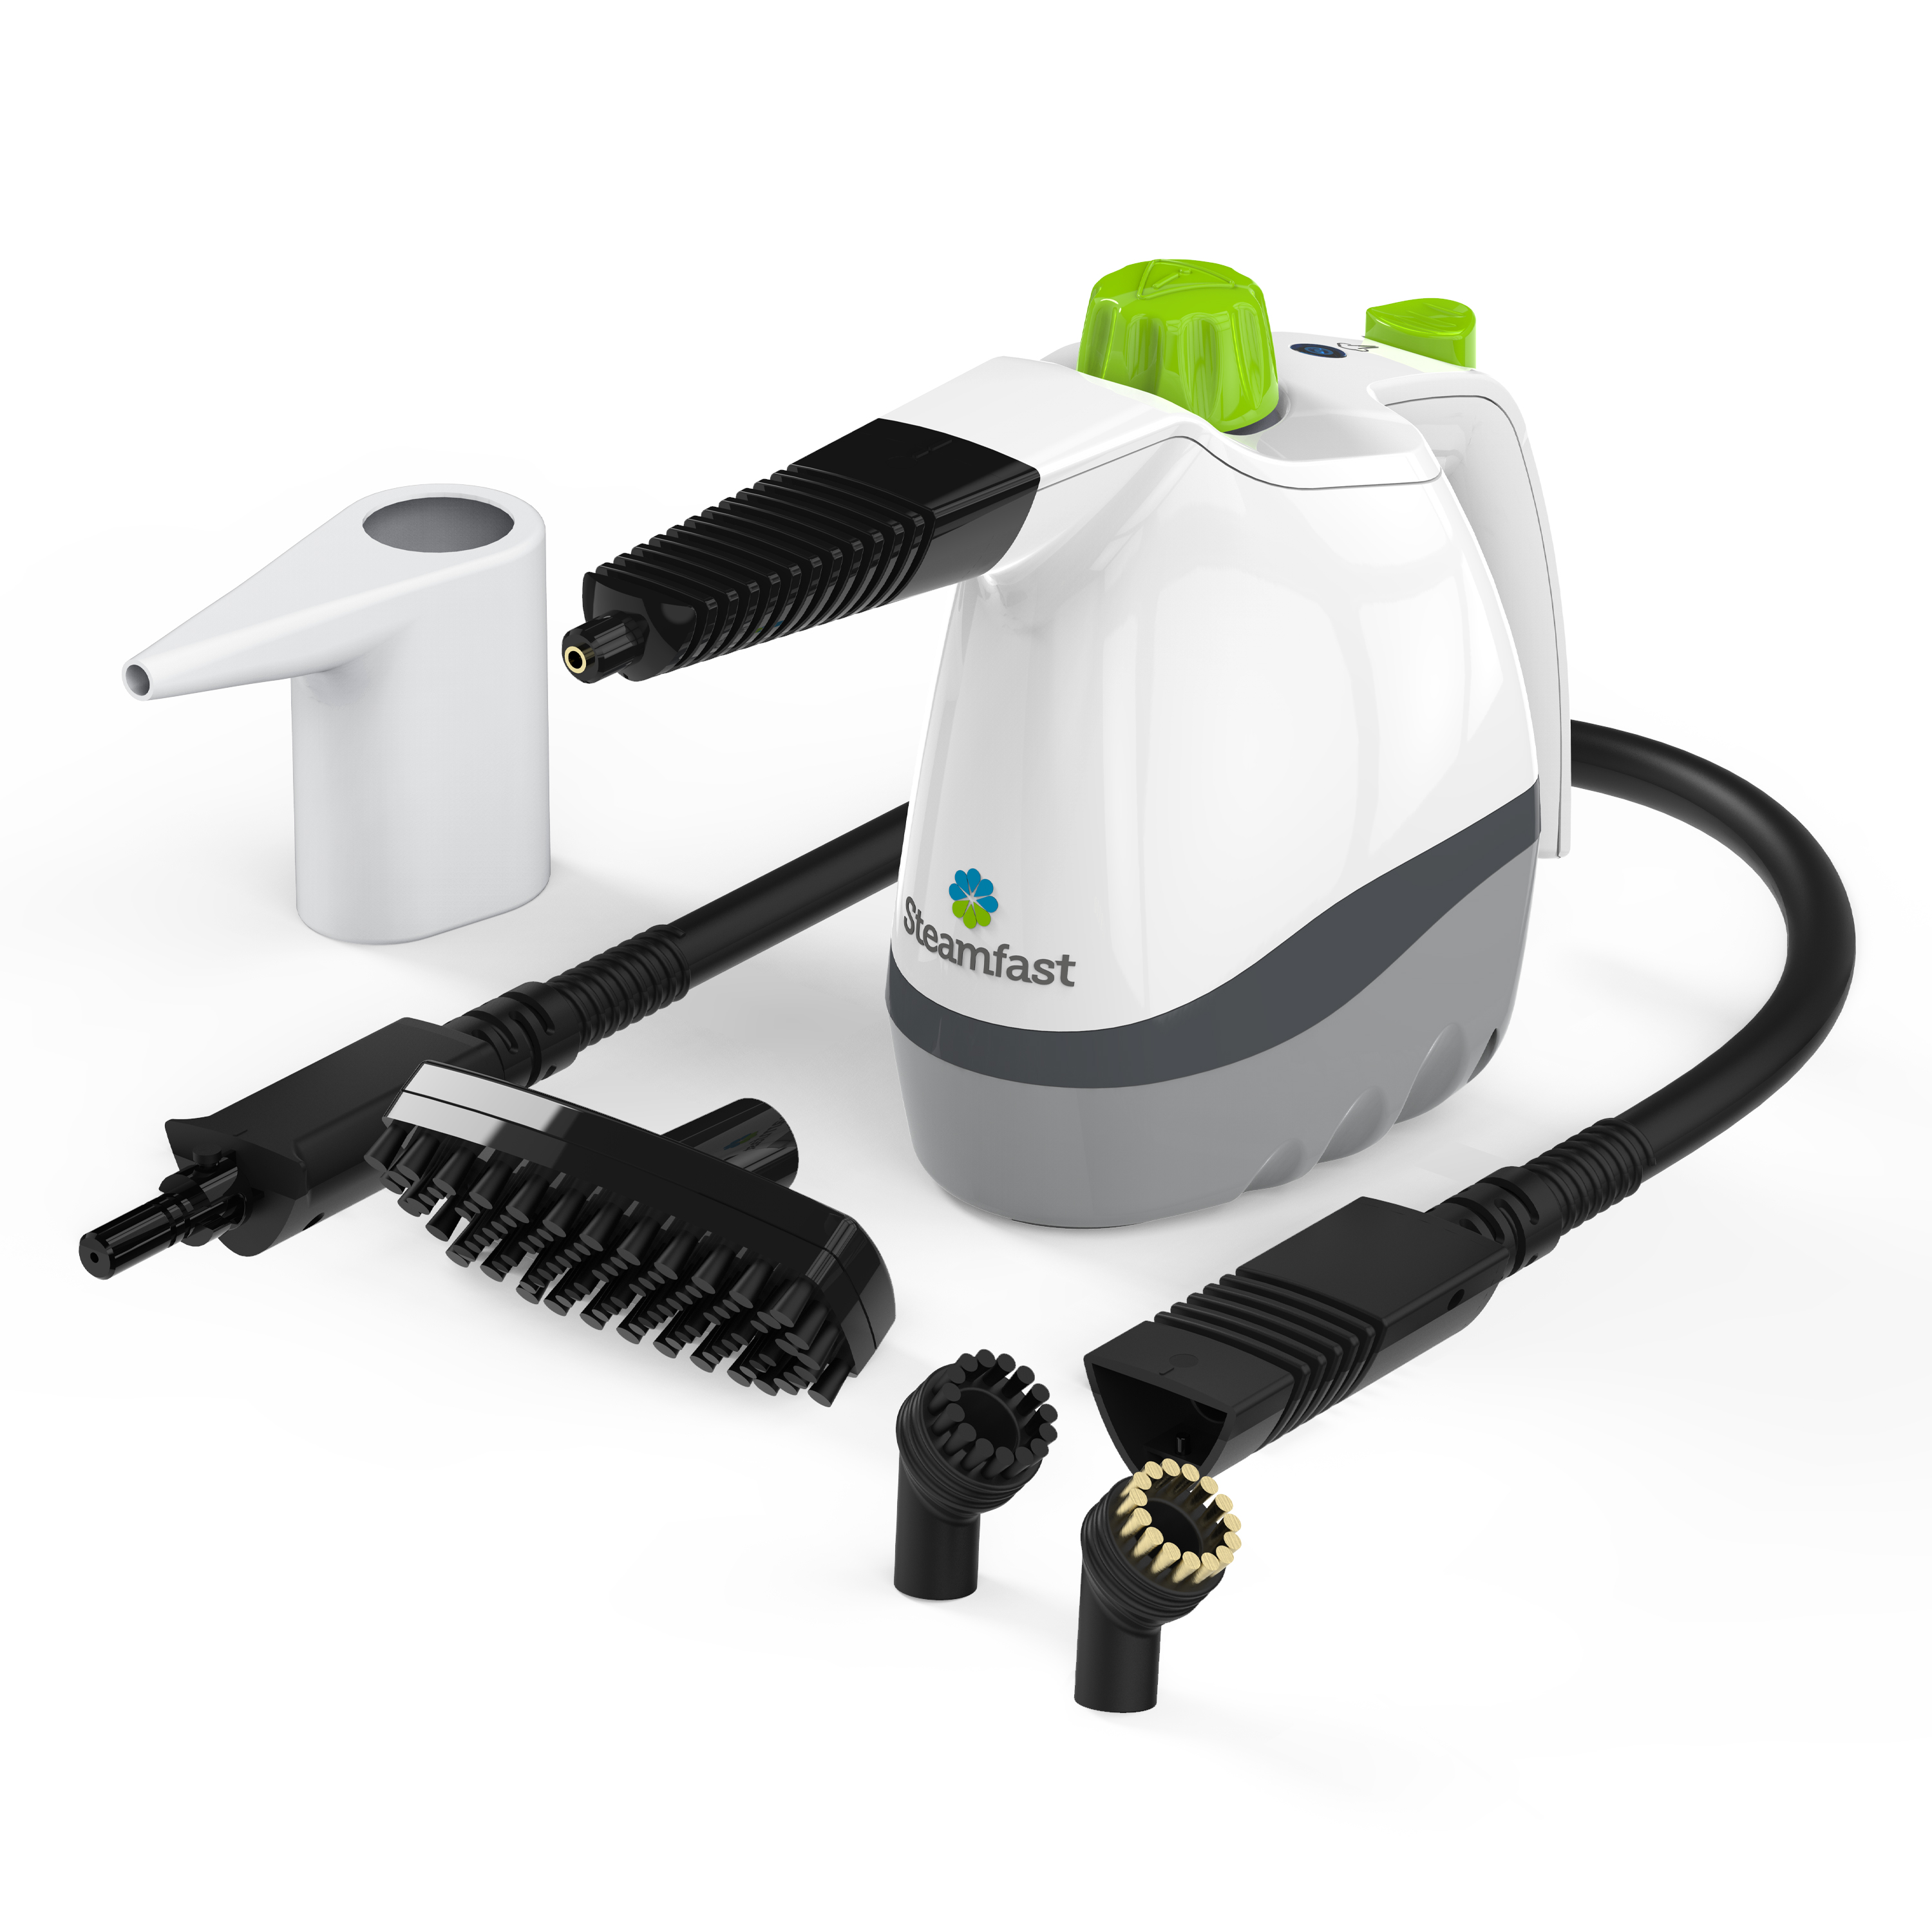 Steamfast SF-210 Handheld Steam Cleaner with 6 Accessories - image 2 of 8